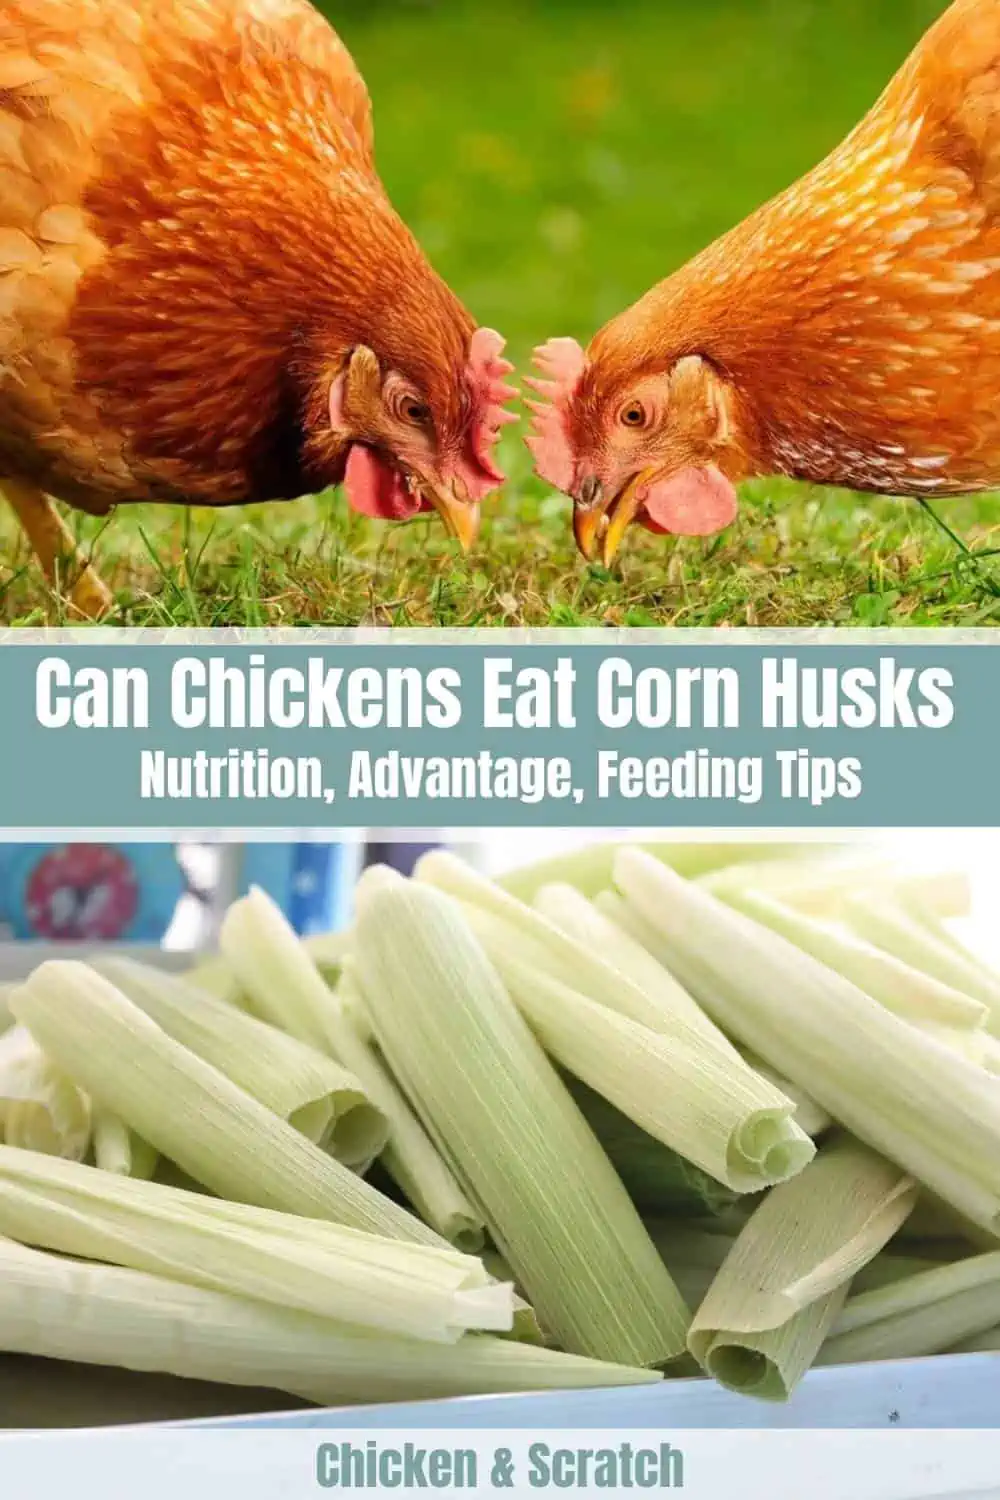 Can Chickens Eat Corn Husks